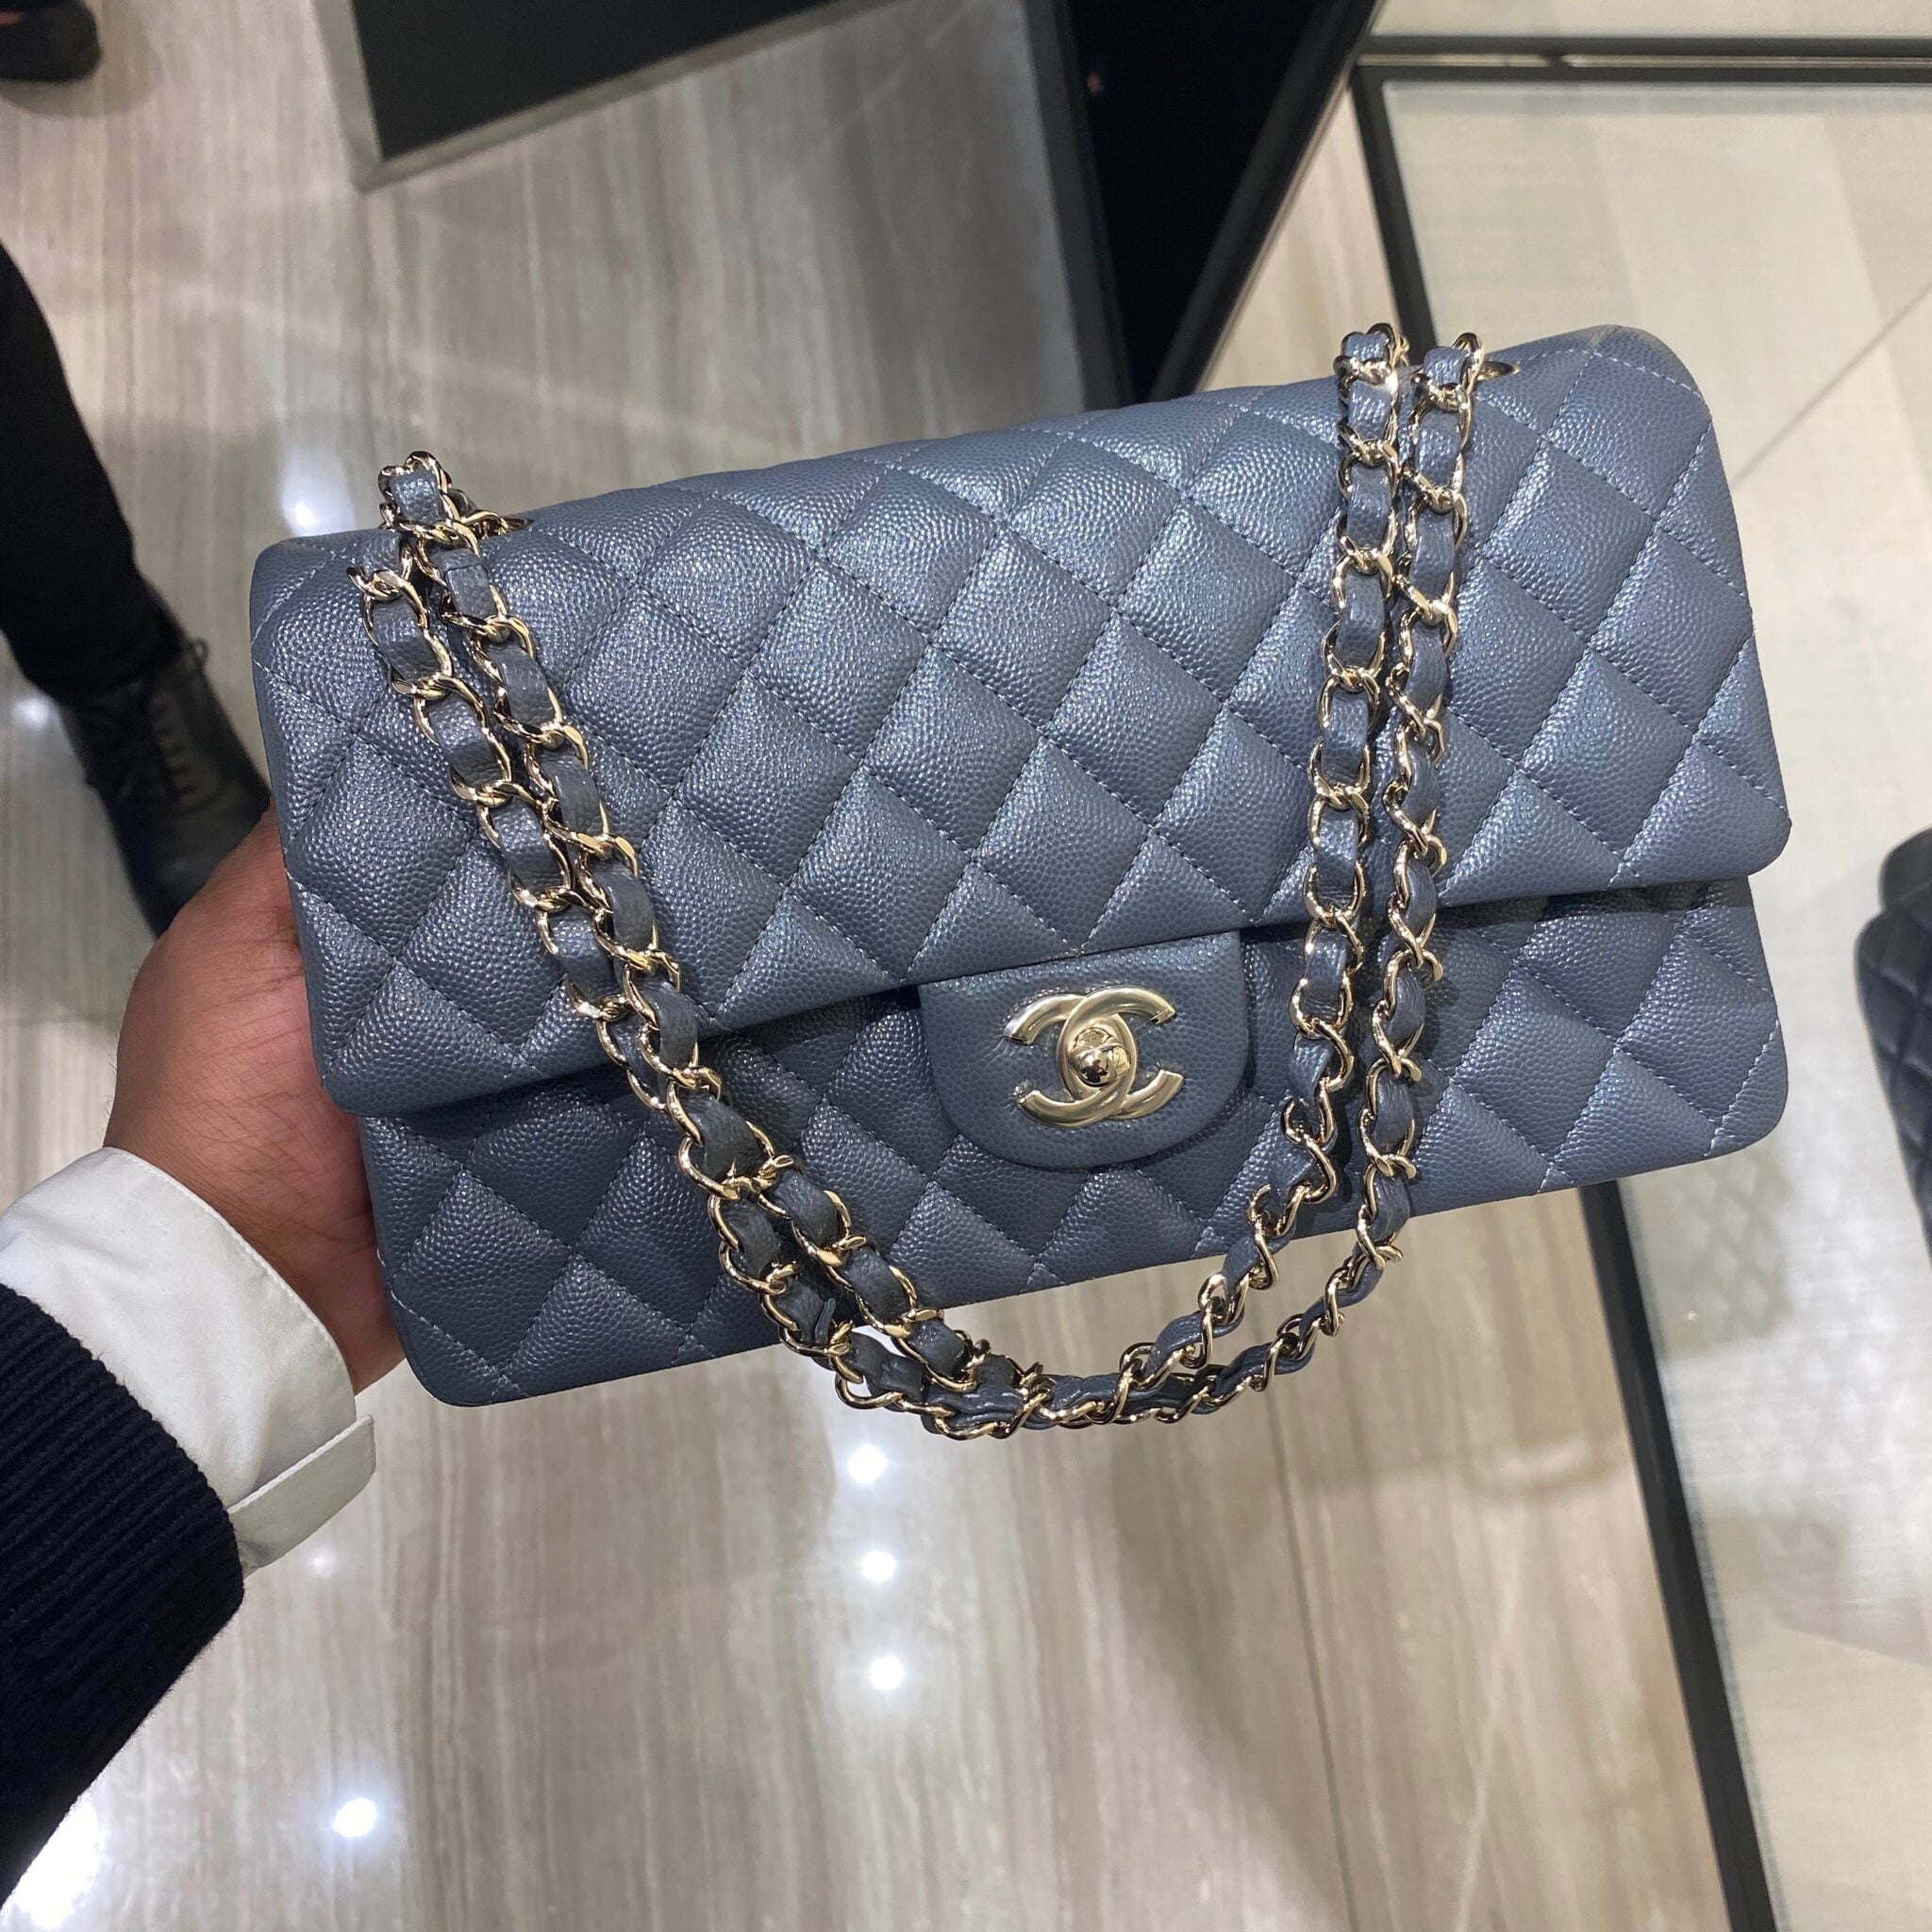 What’s Really Going On With Chanel Prices? - PurseBop